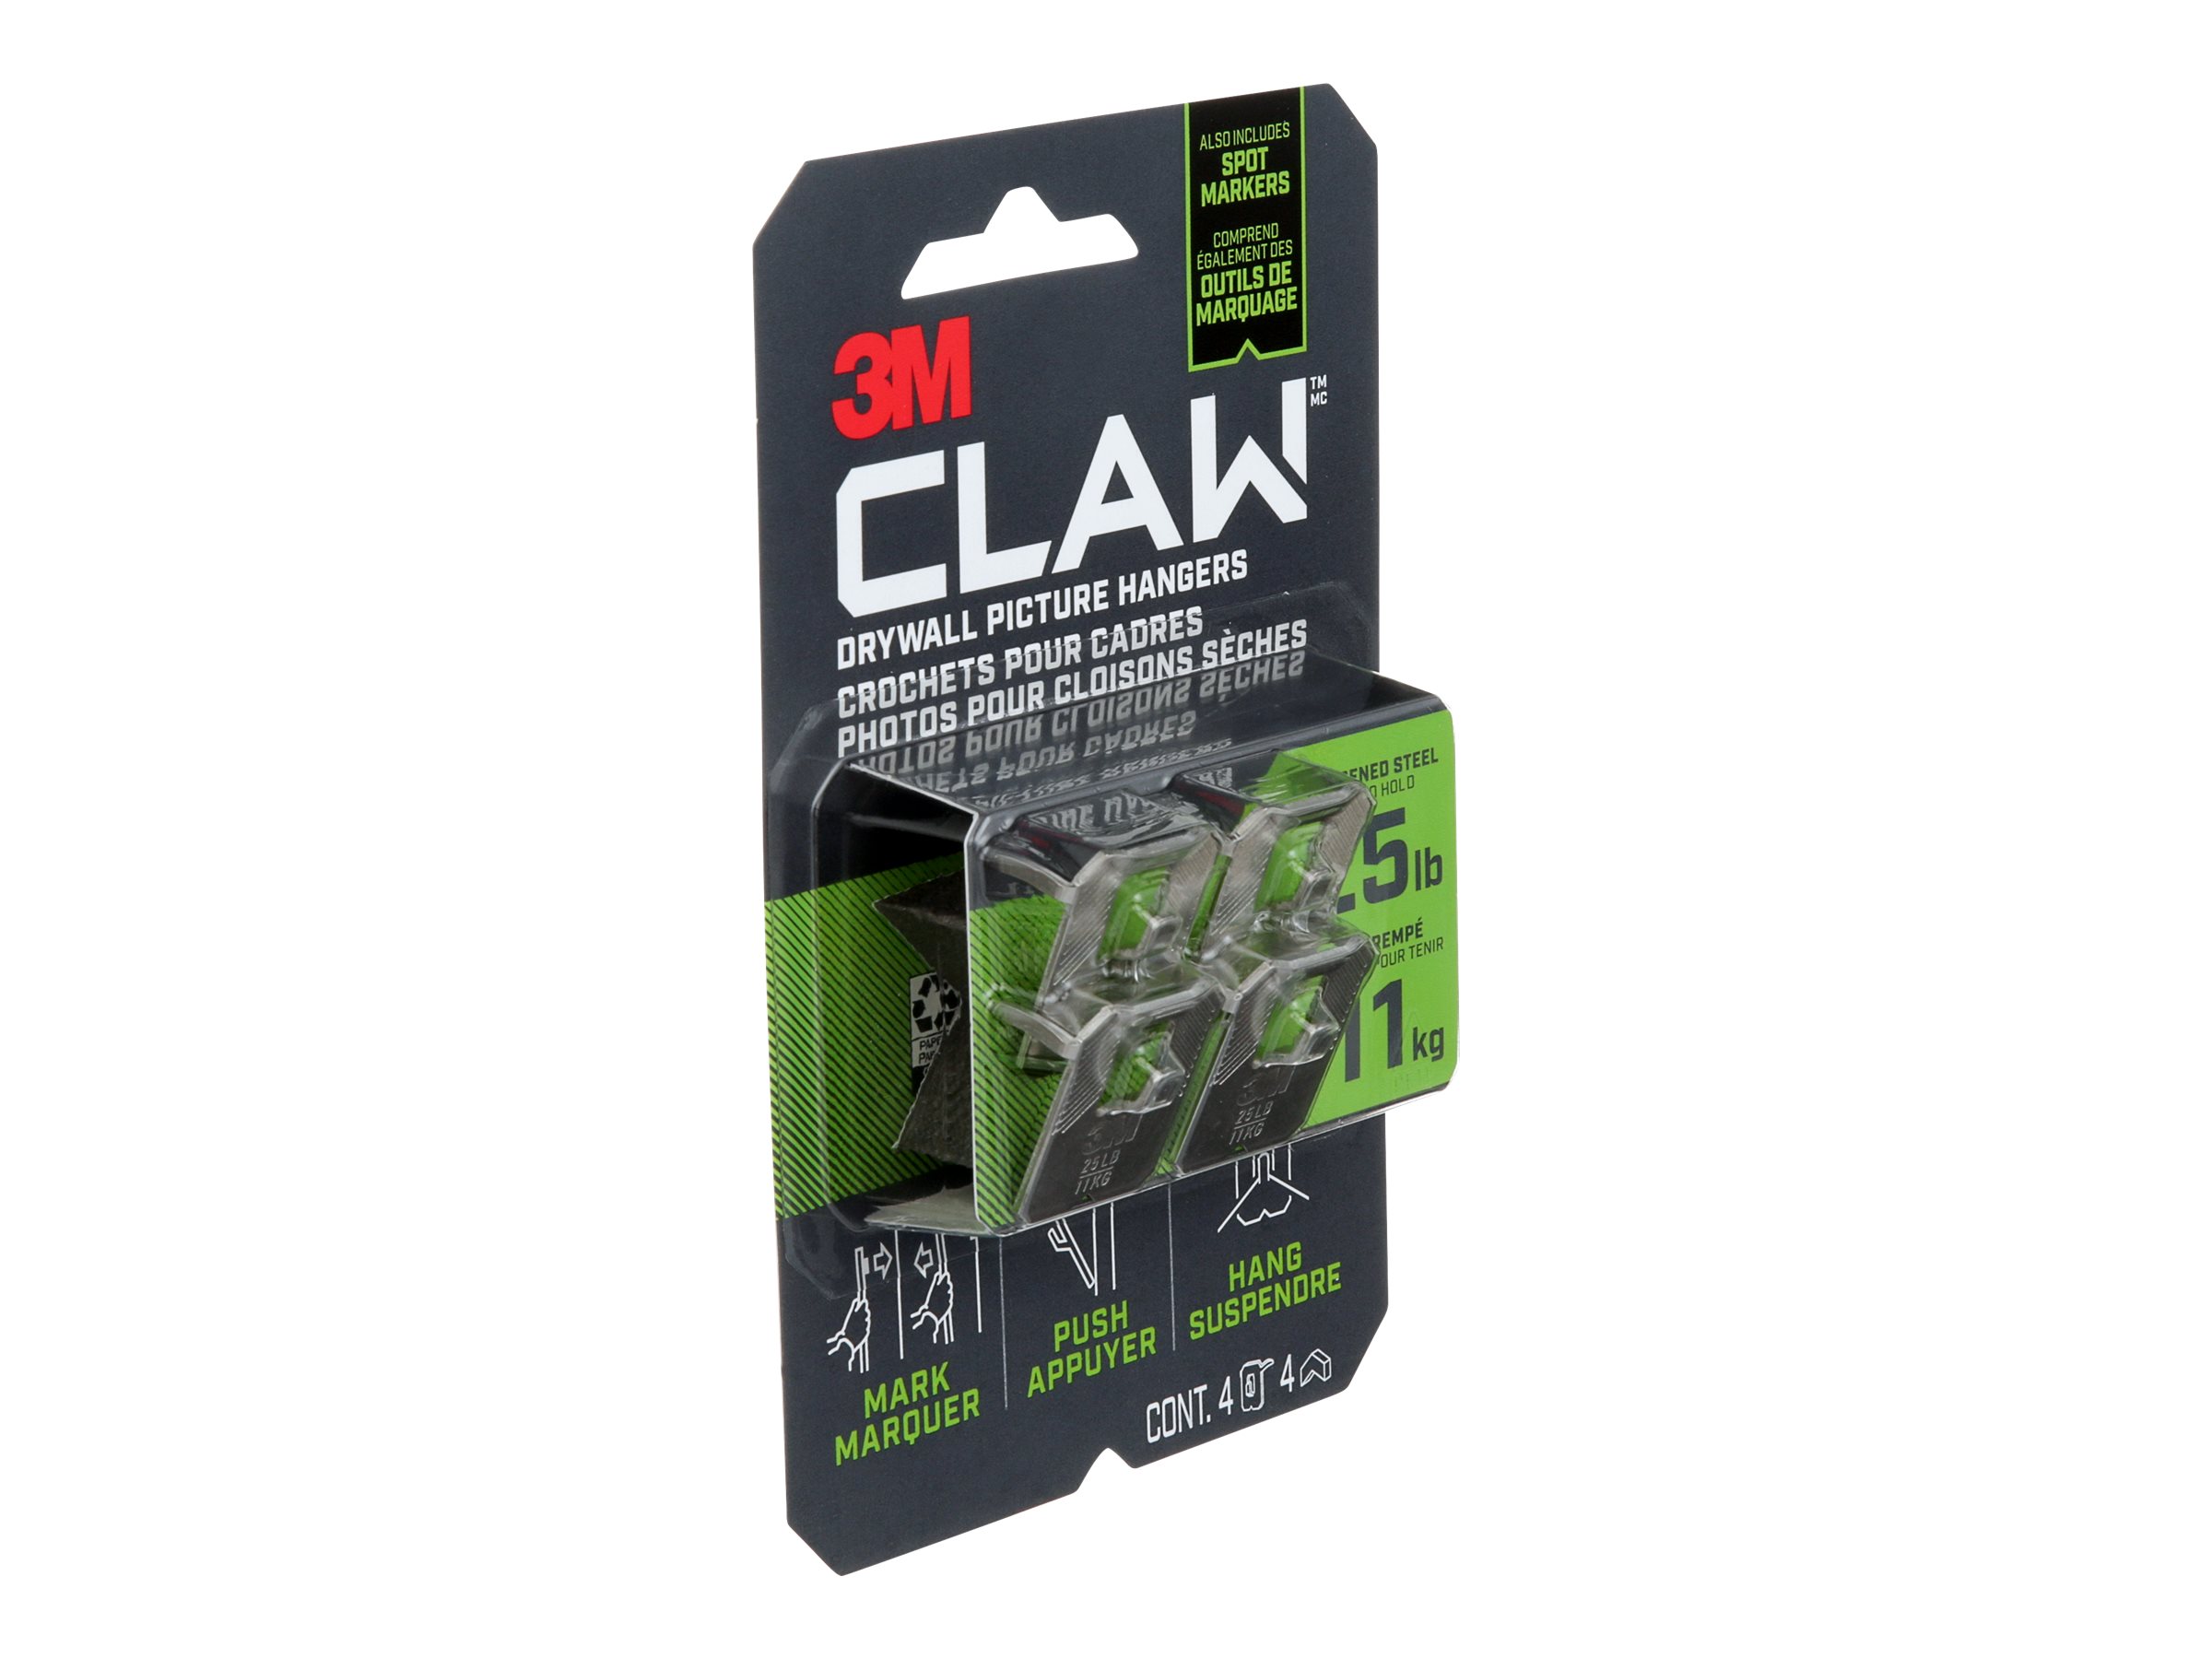 3M CLAW PICTURE HANGER 3PH25M-4EF